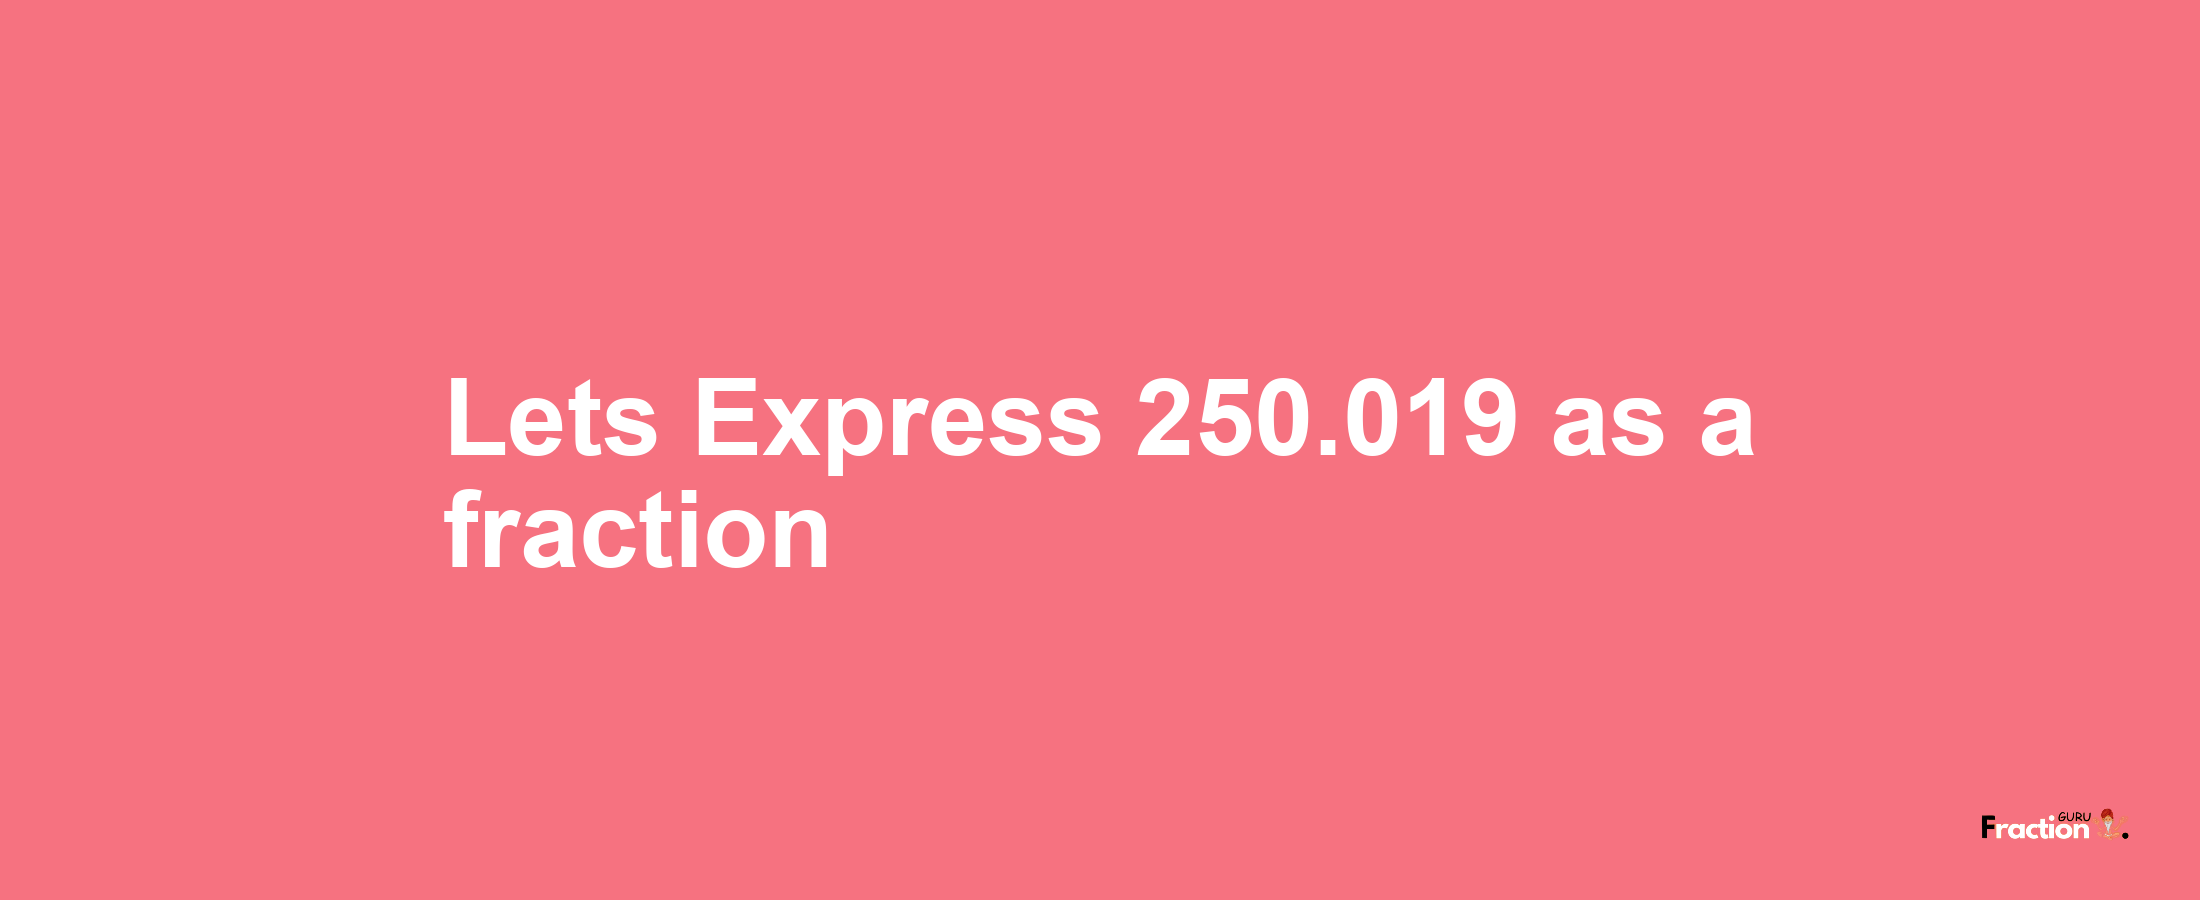 Lets Express 250.019 as afraction